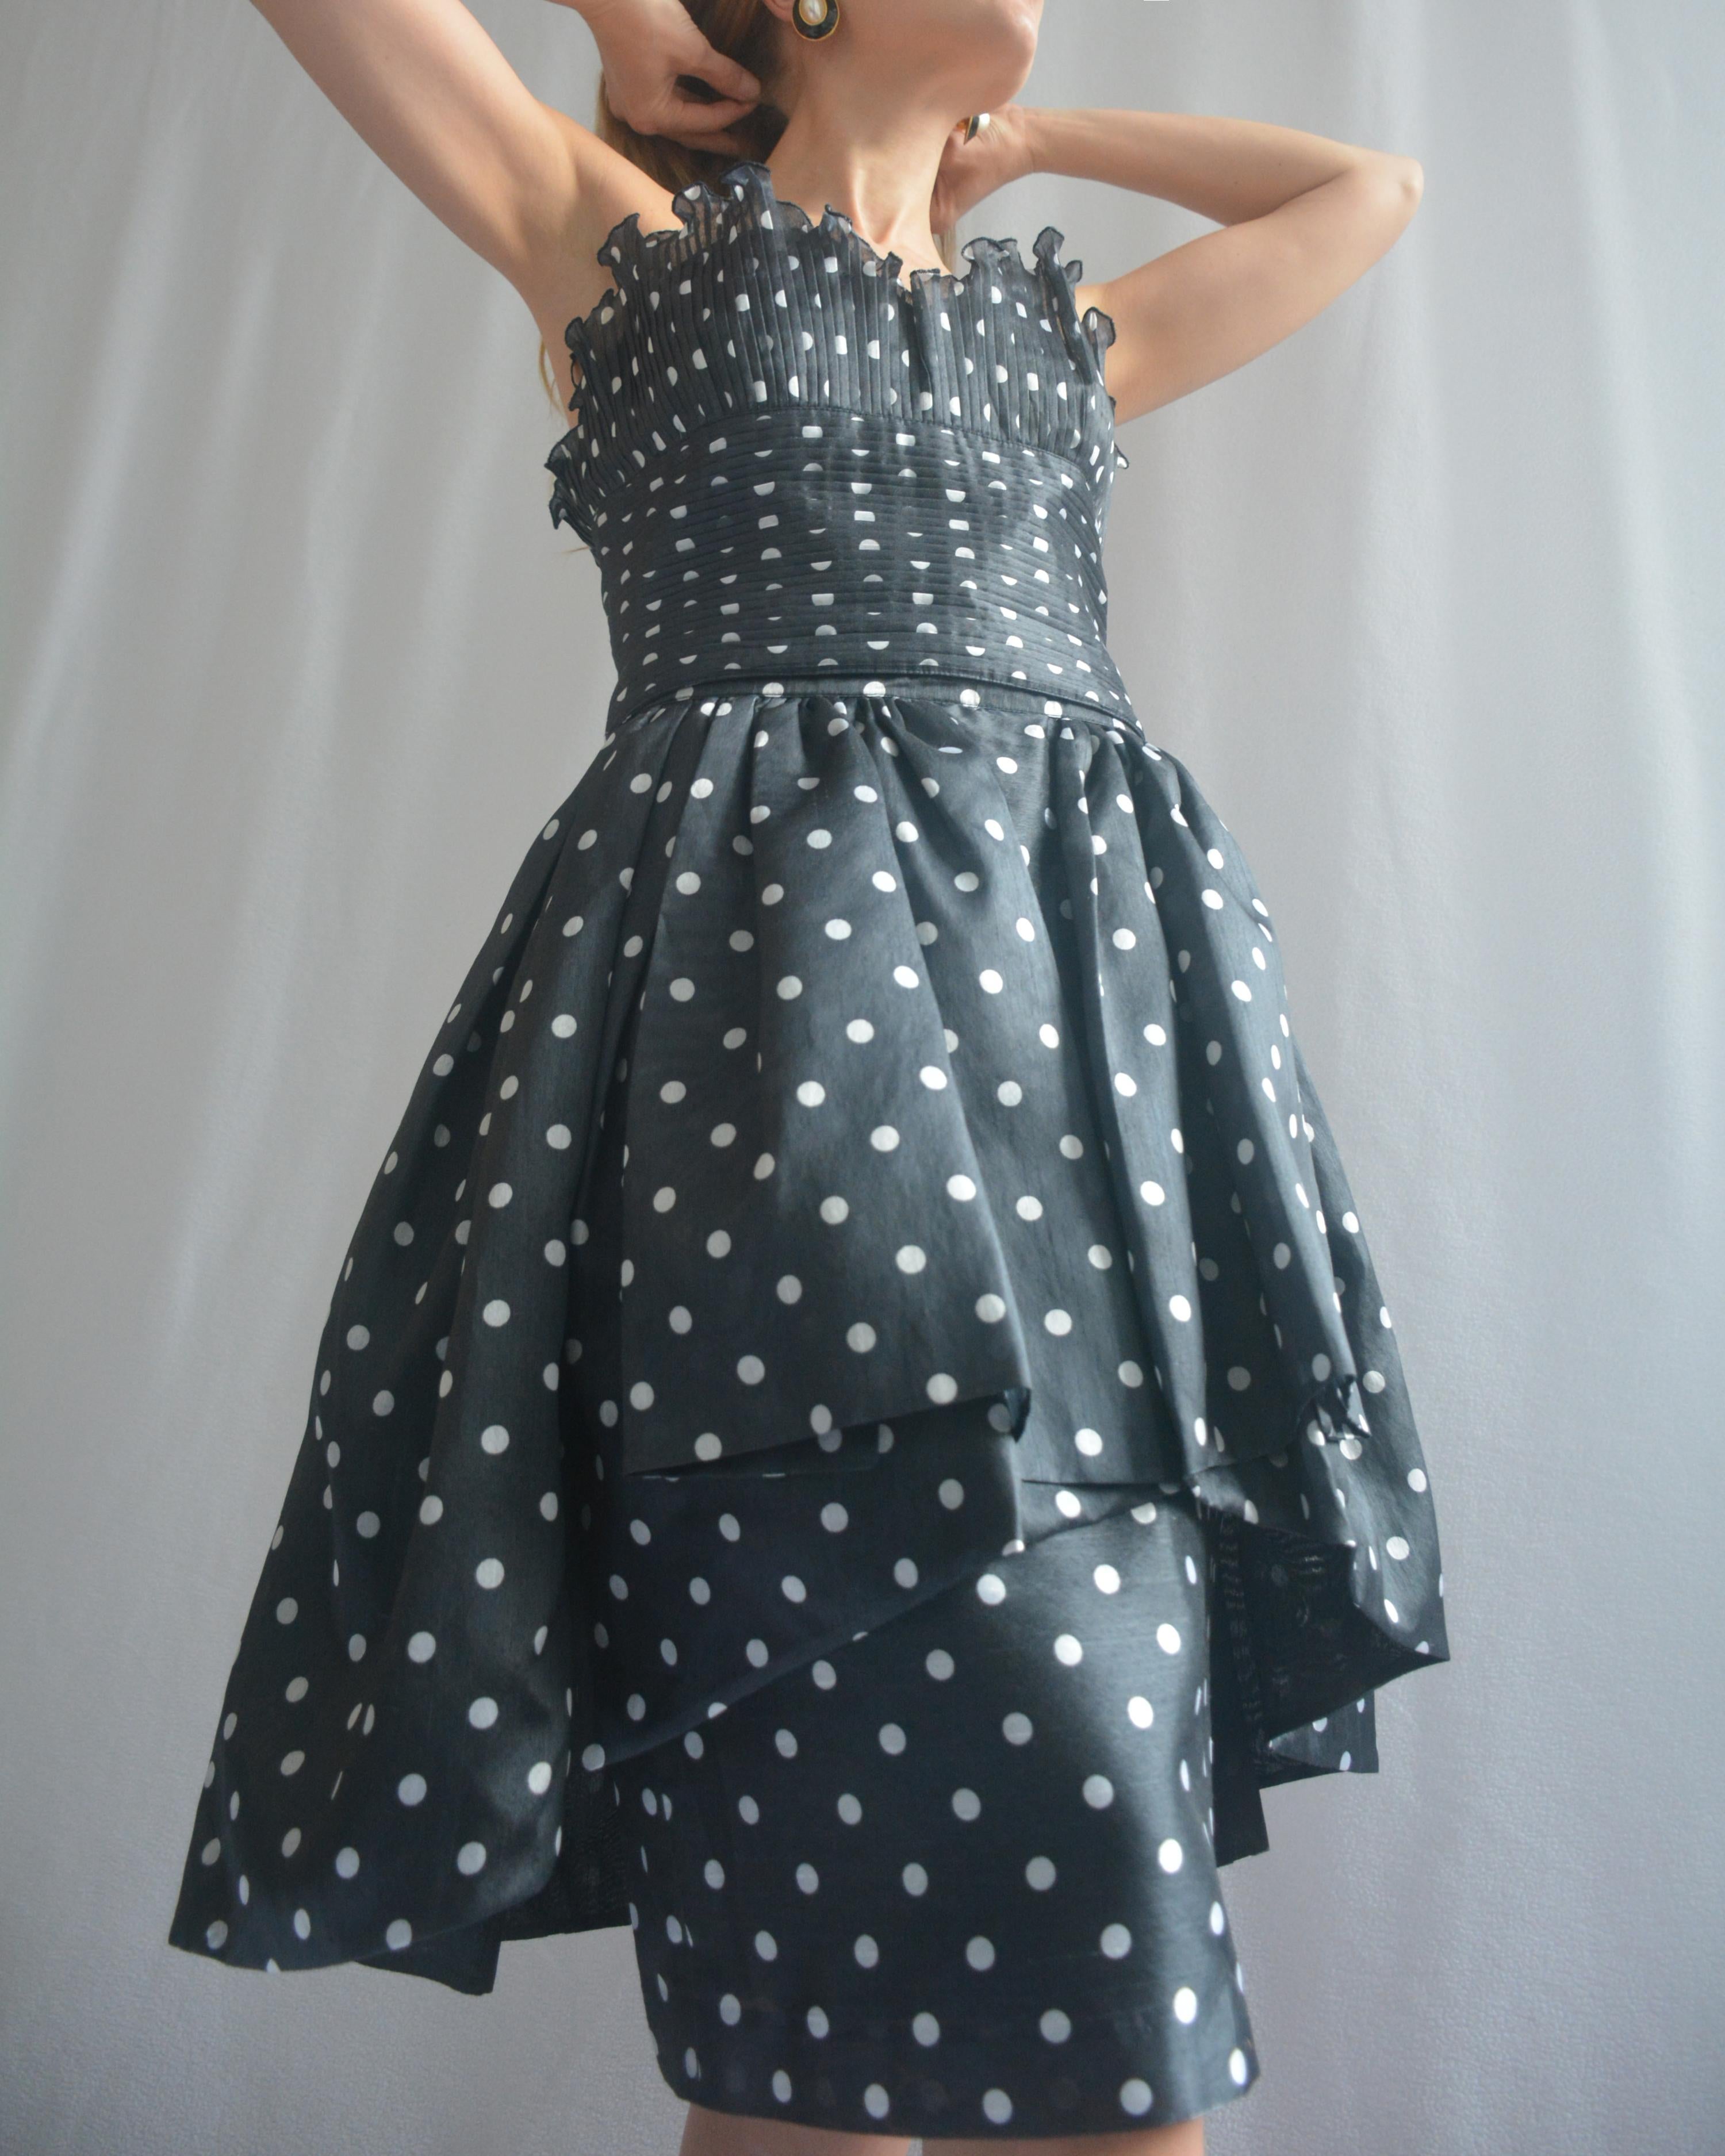 VINTAGE 1980s LORIS AZZARO POLKA DOT CORSET TWO-PIECE DRESS In Excellent Condition For Sale In New York, NY